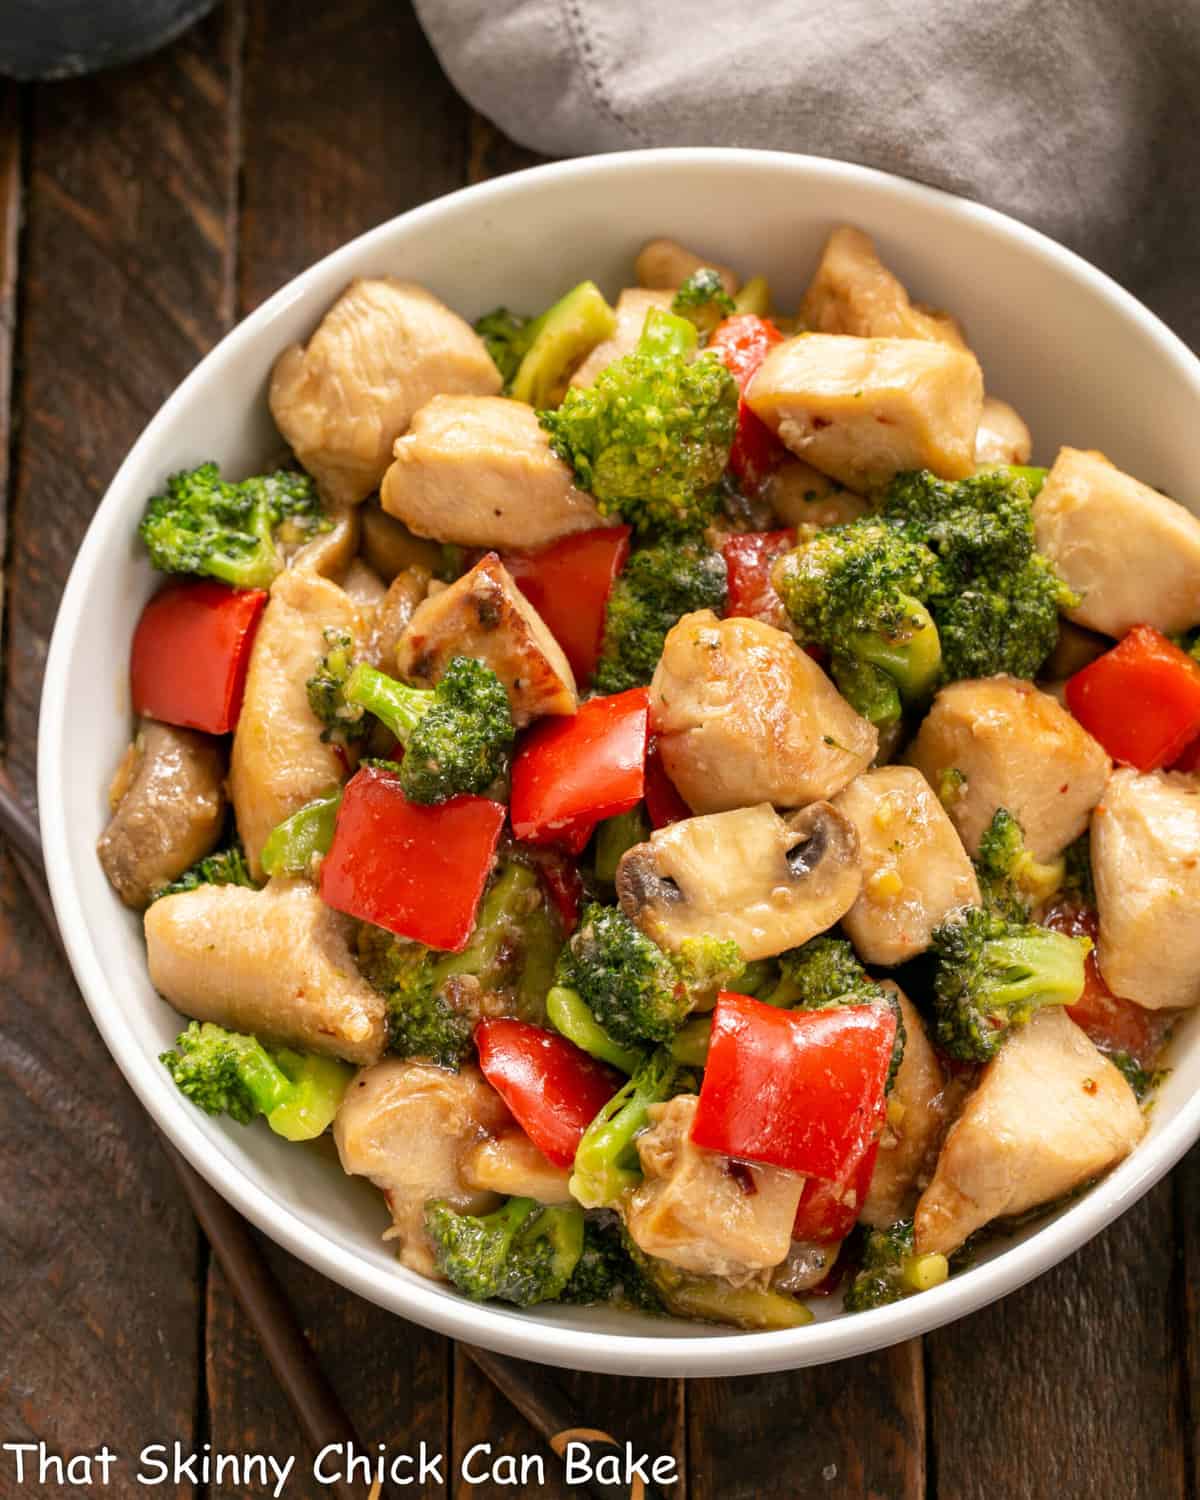 Overhead view of serving bowl full of chicken and broccoli stir fry.